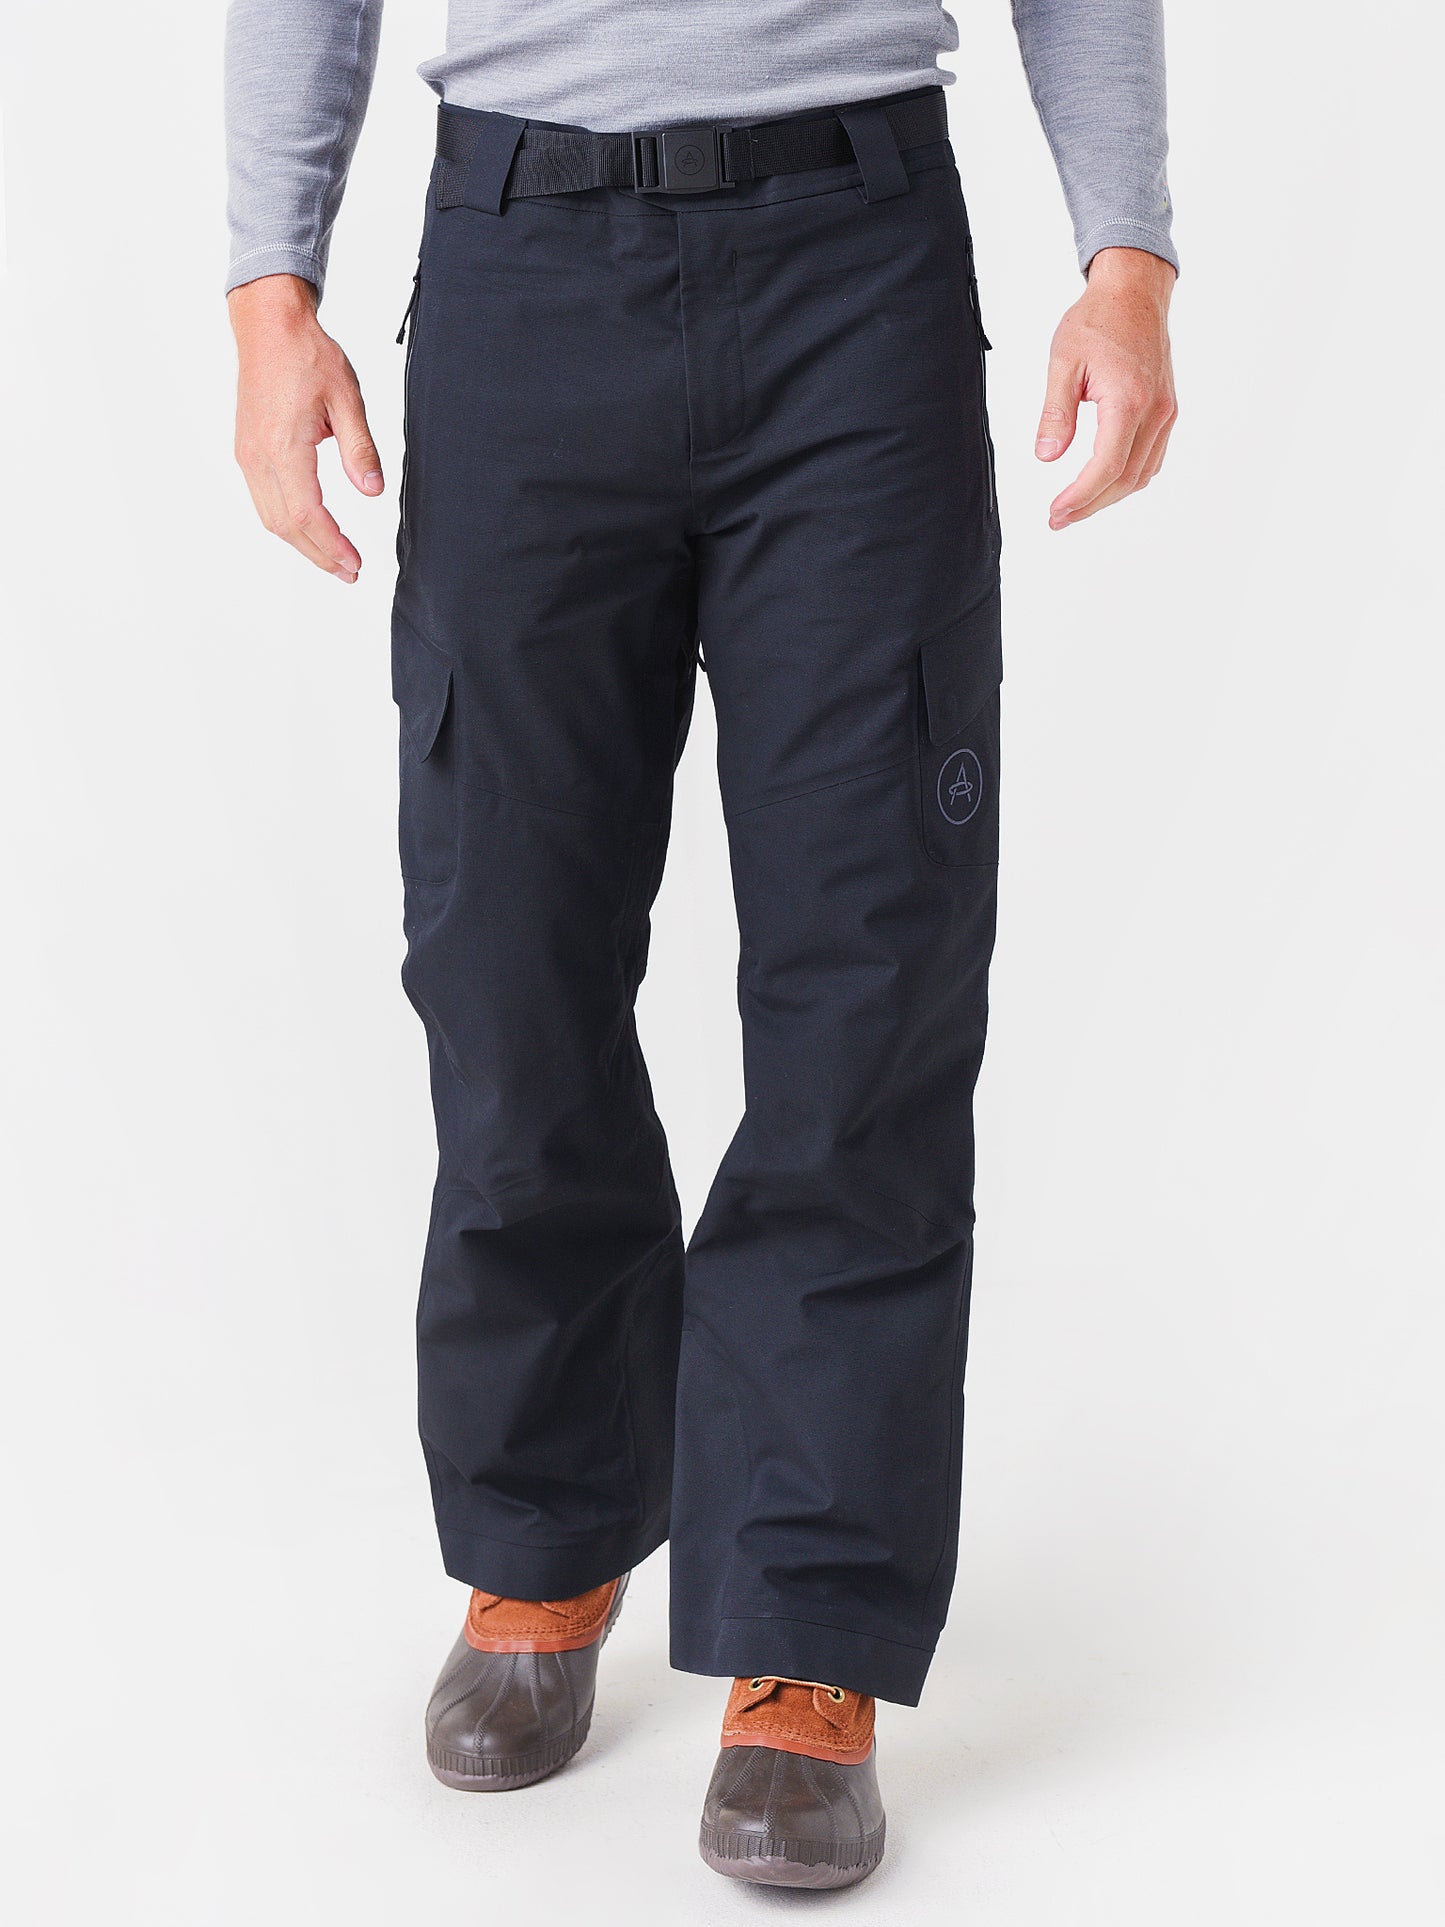 Aether Men's Carlyle Snow Pant